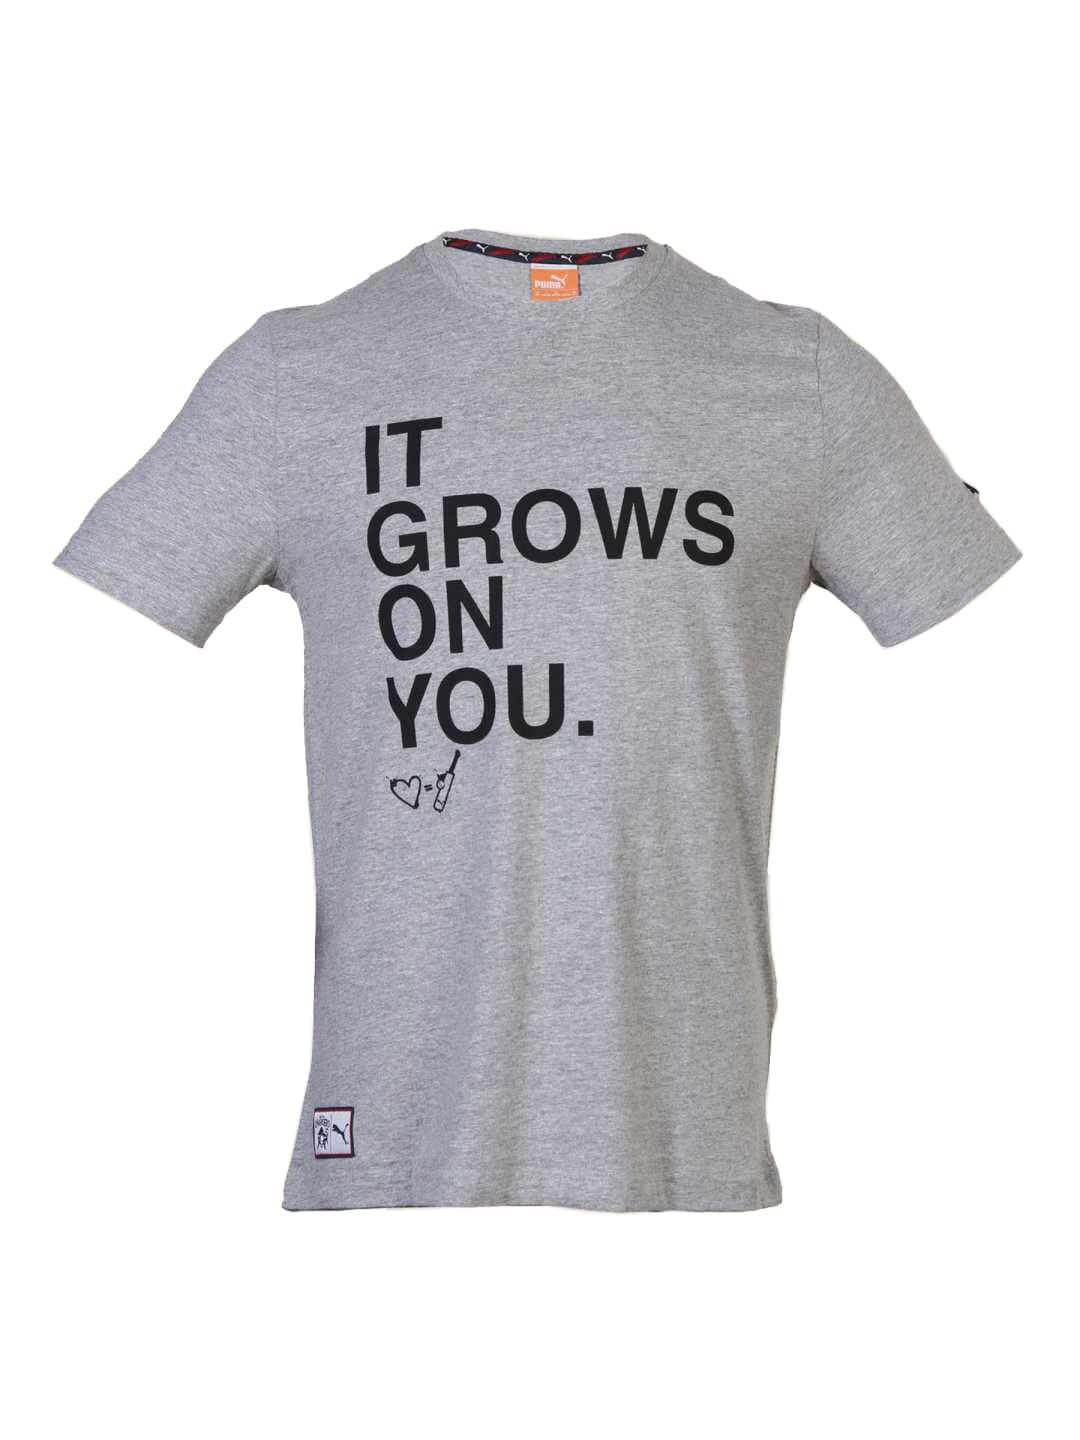 Puma Men's Deccan Chargers It Grows on You Grey T-shirt